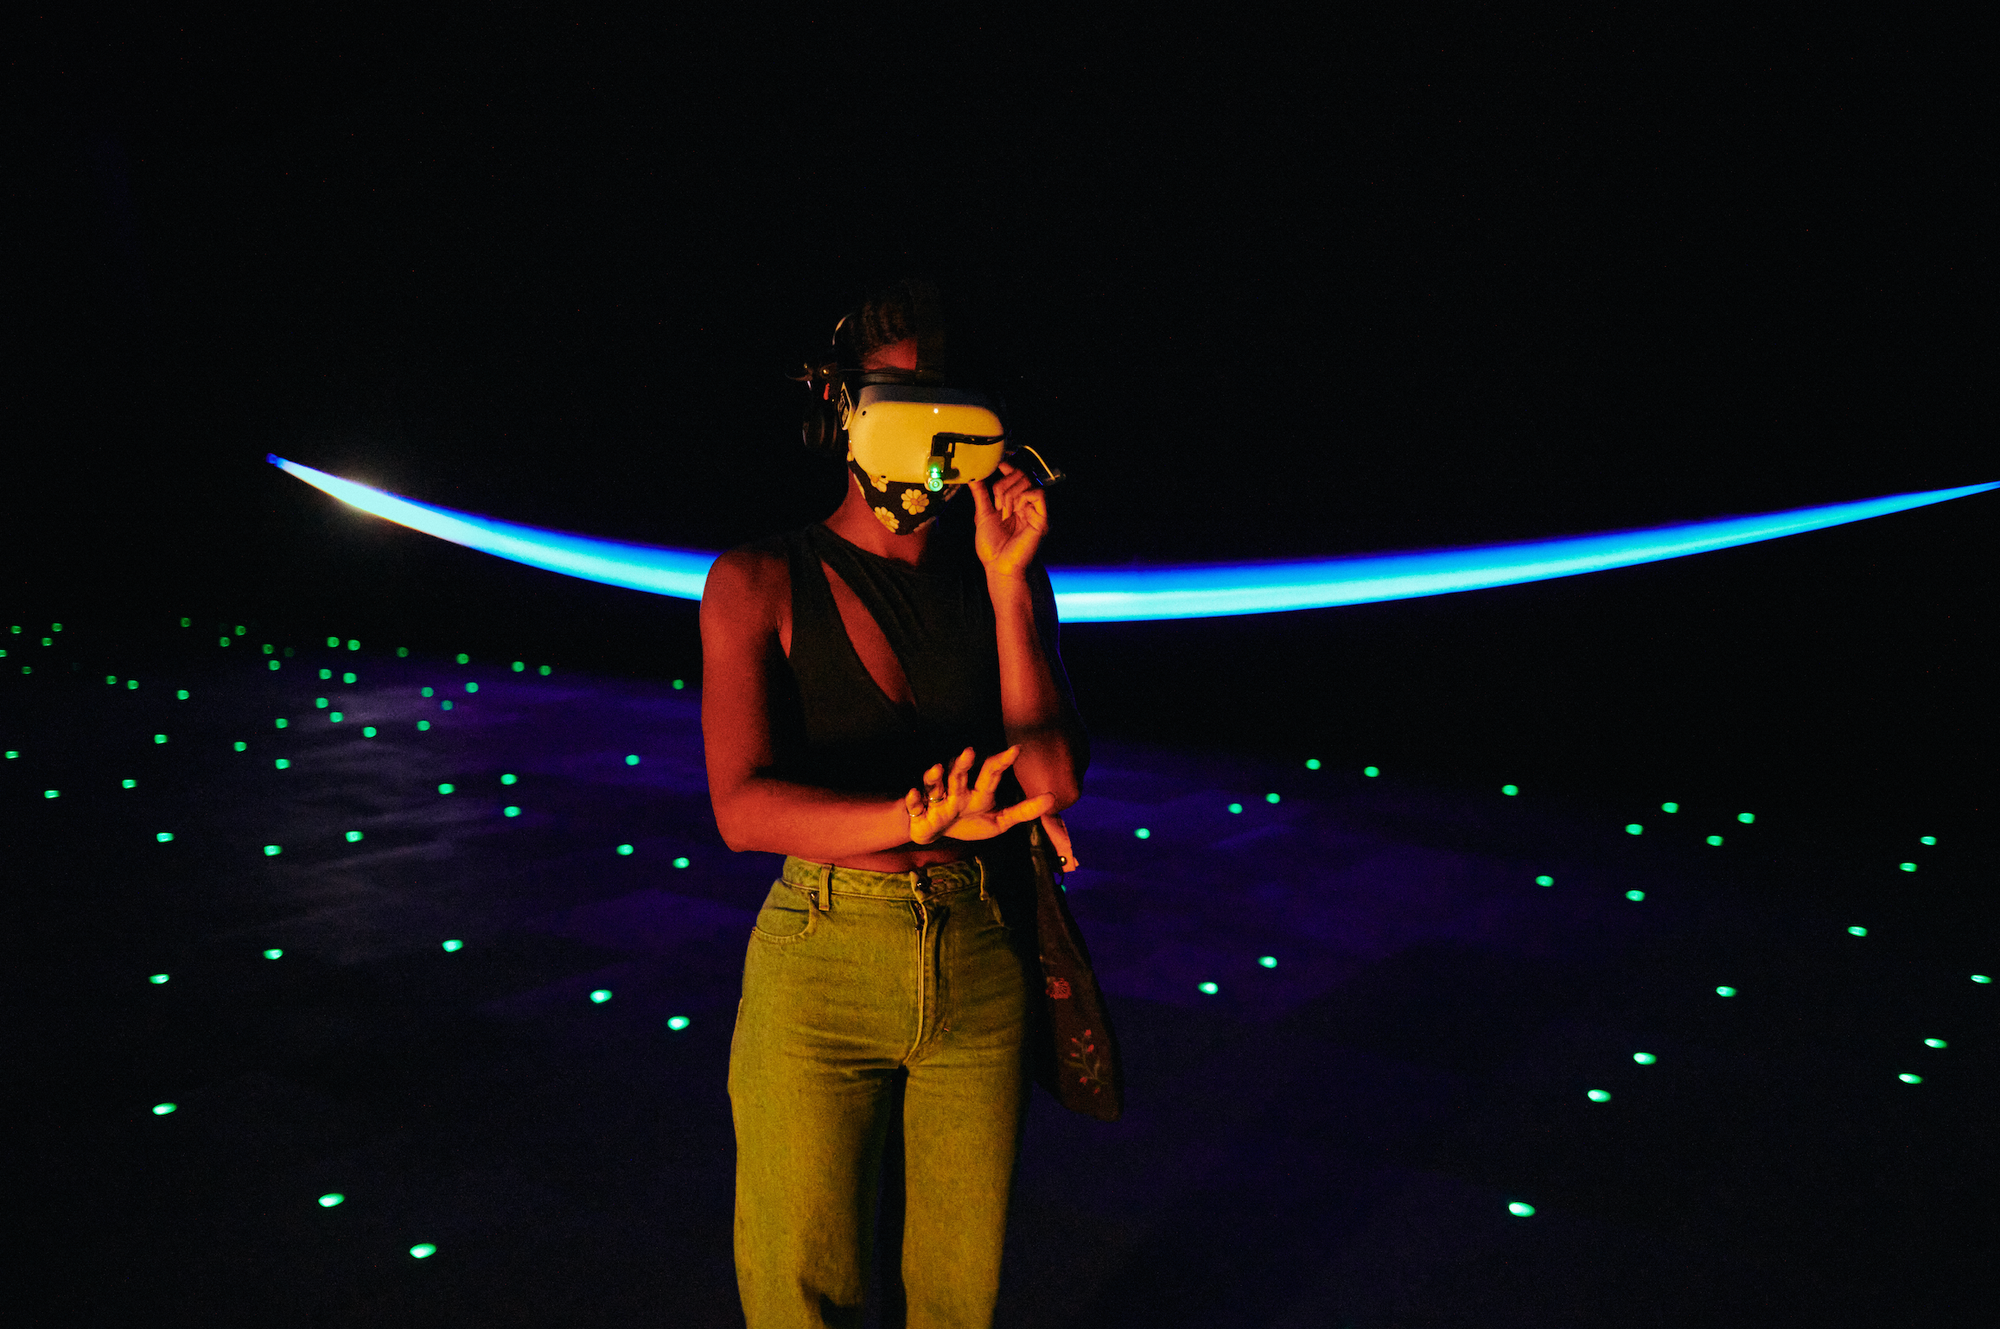 'The Infinite' Virtual Reality Exhibit Offers a Taste of Life in Outer Space